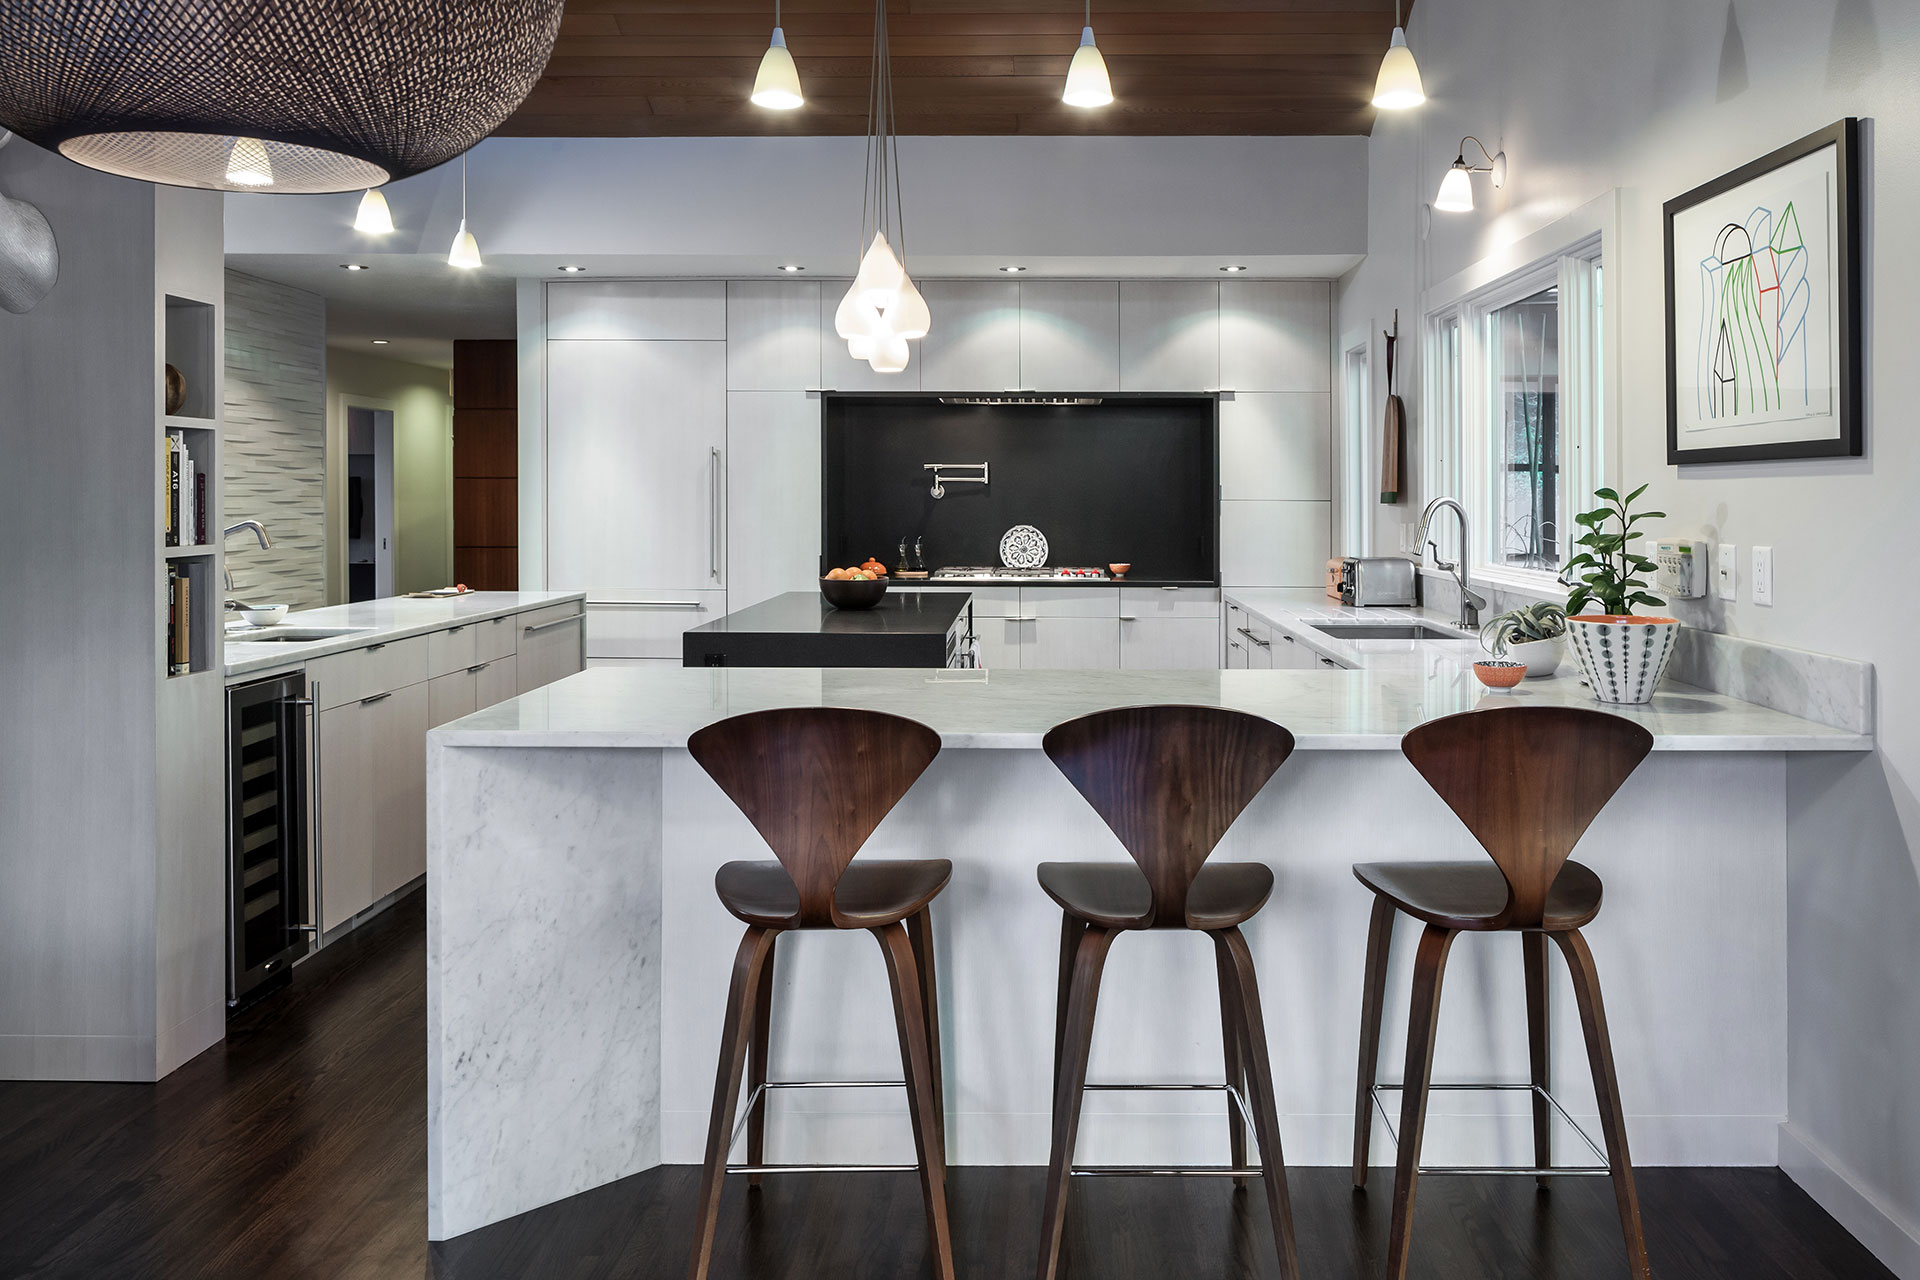 Carrara marble forms a kitchen peninsula perfect for dining at the Patton Modern.